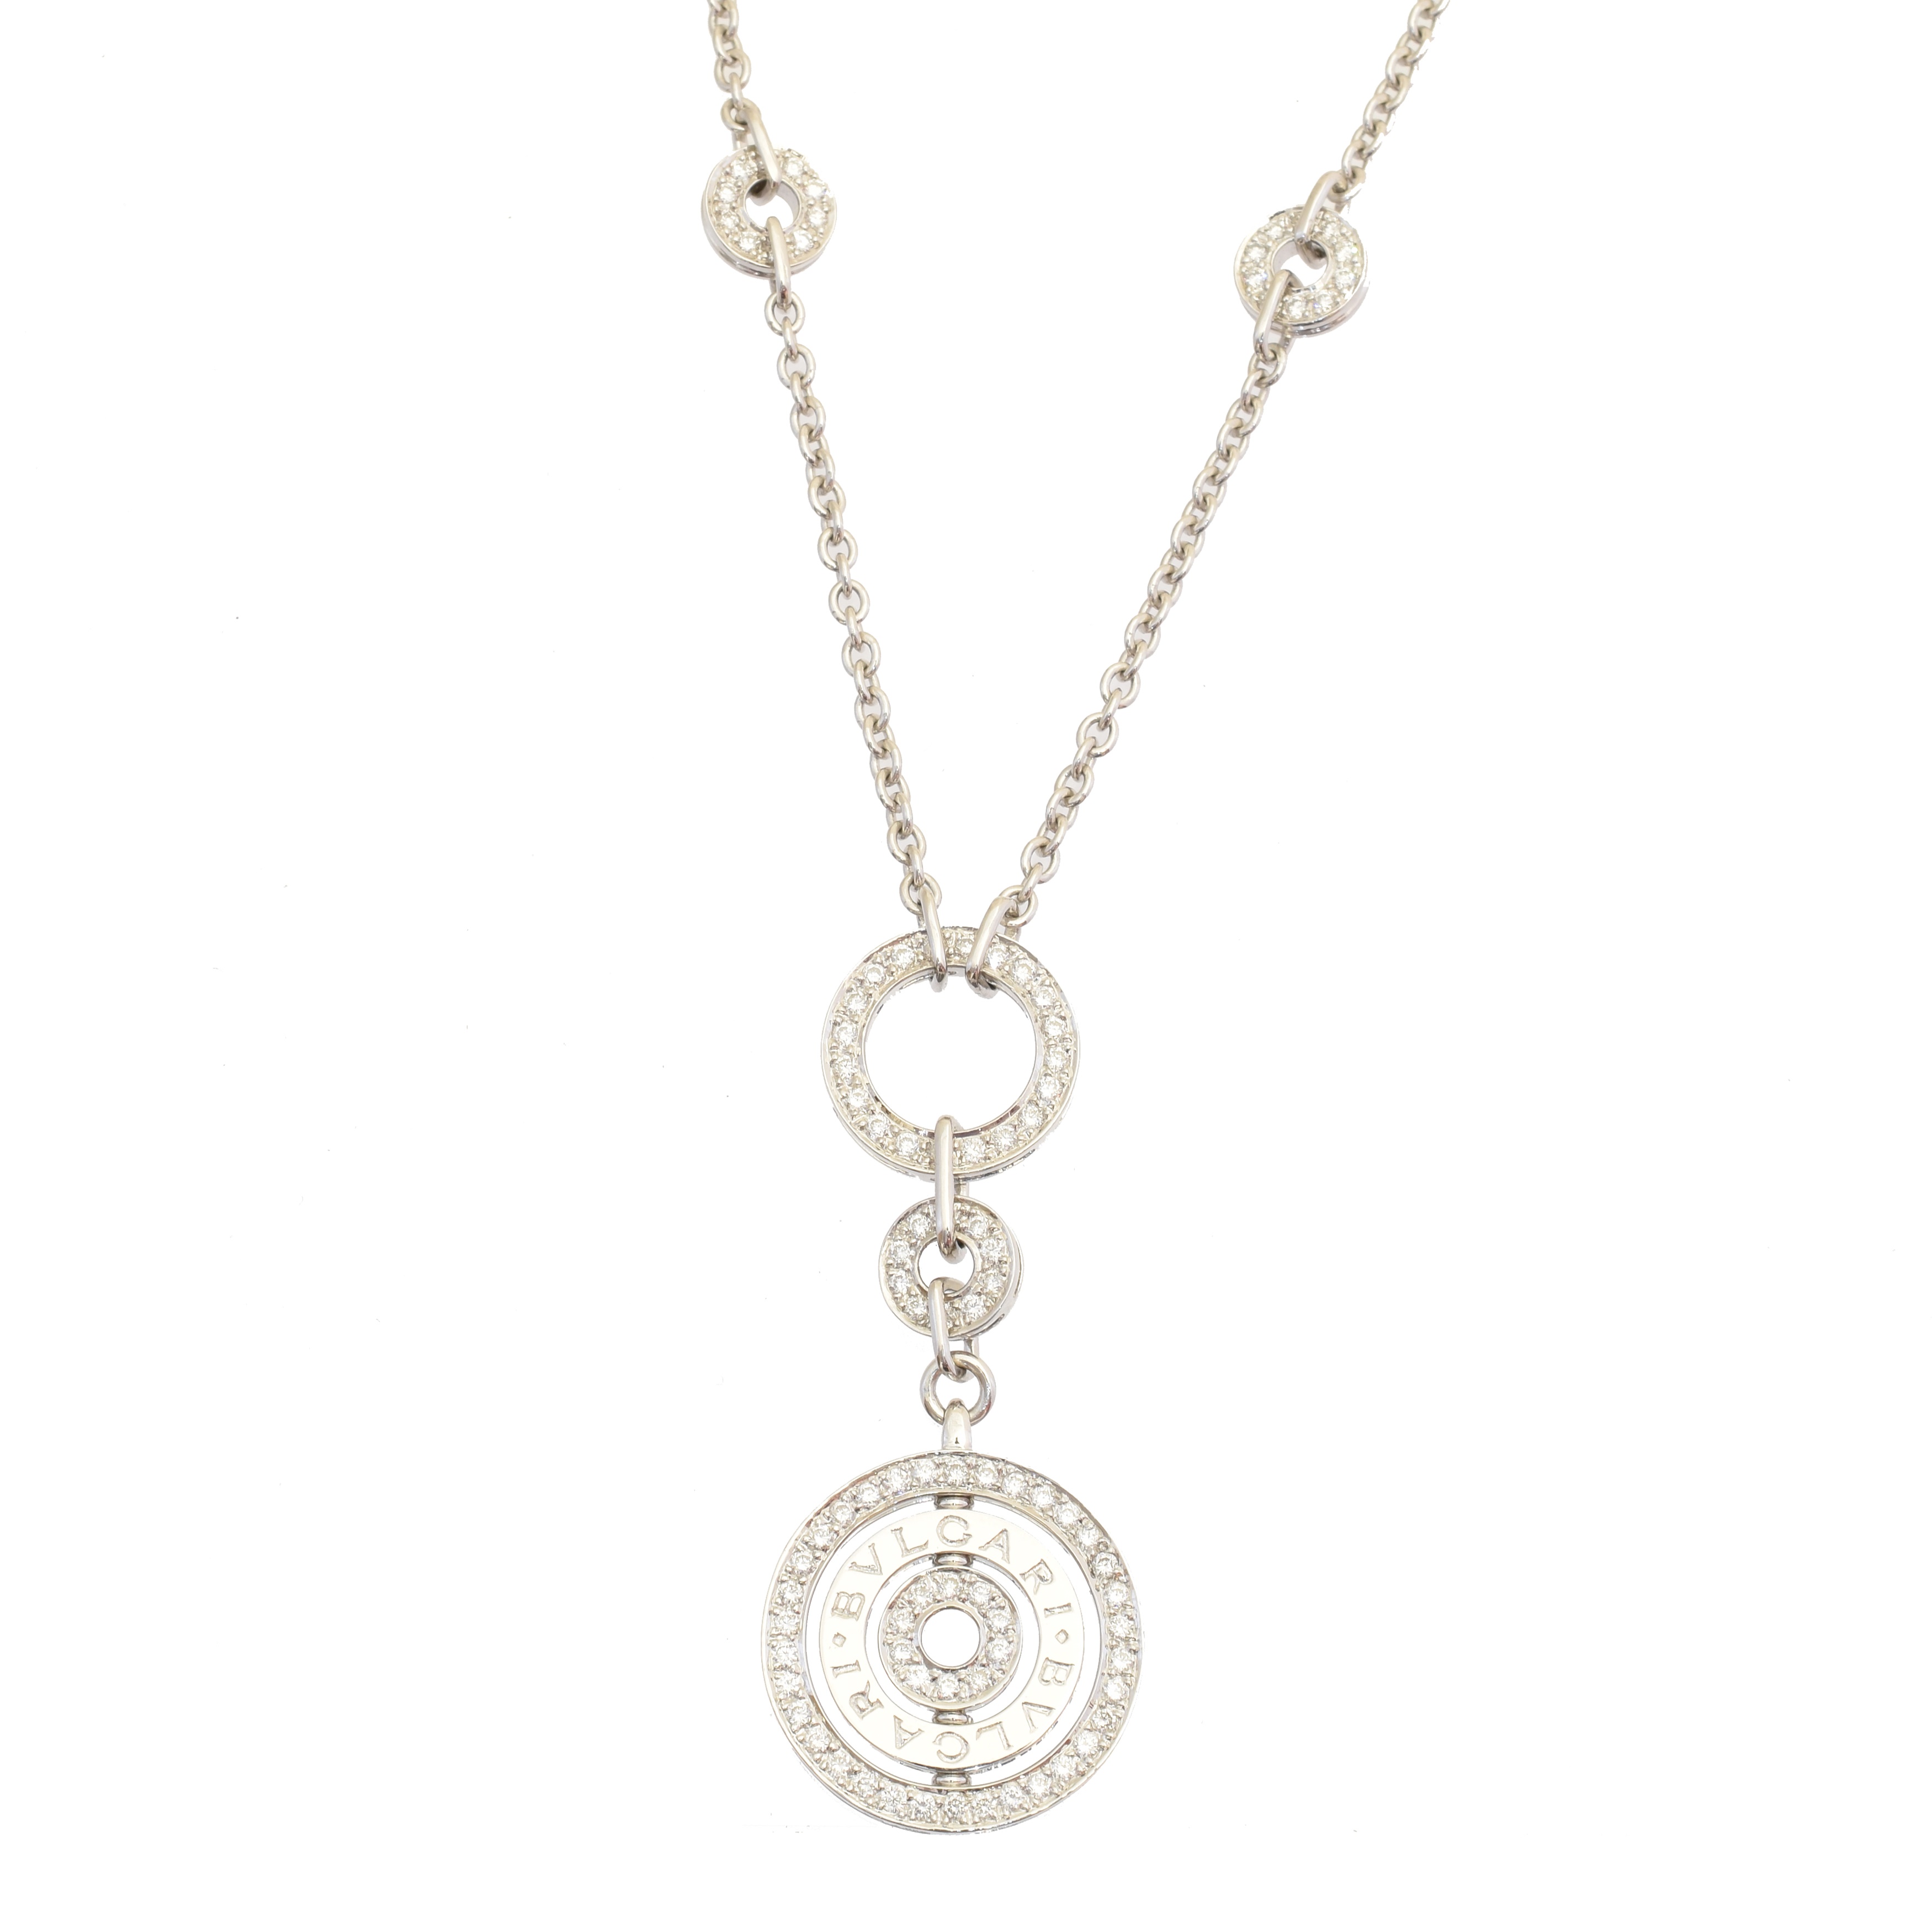 An 18ct Bulgari 'Astrale' gold and diamond necklace